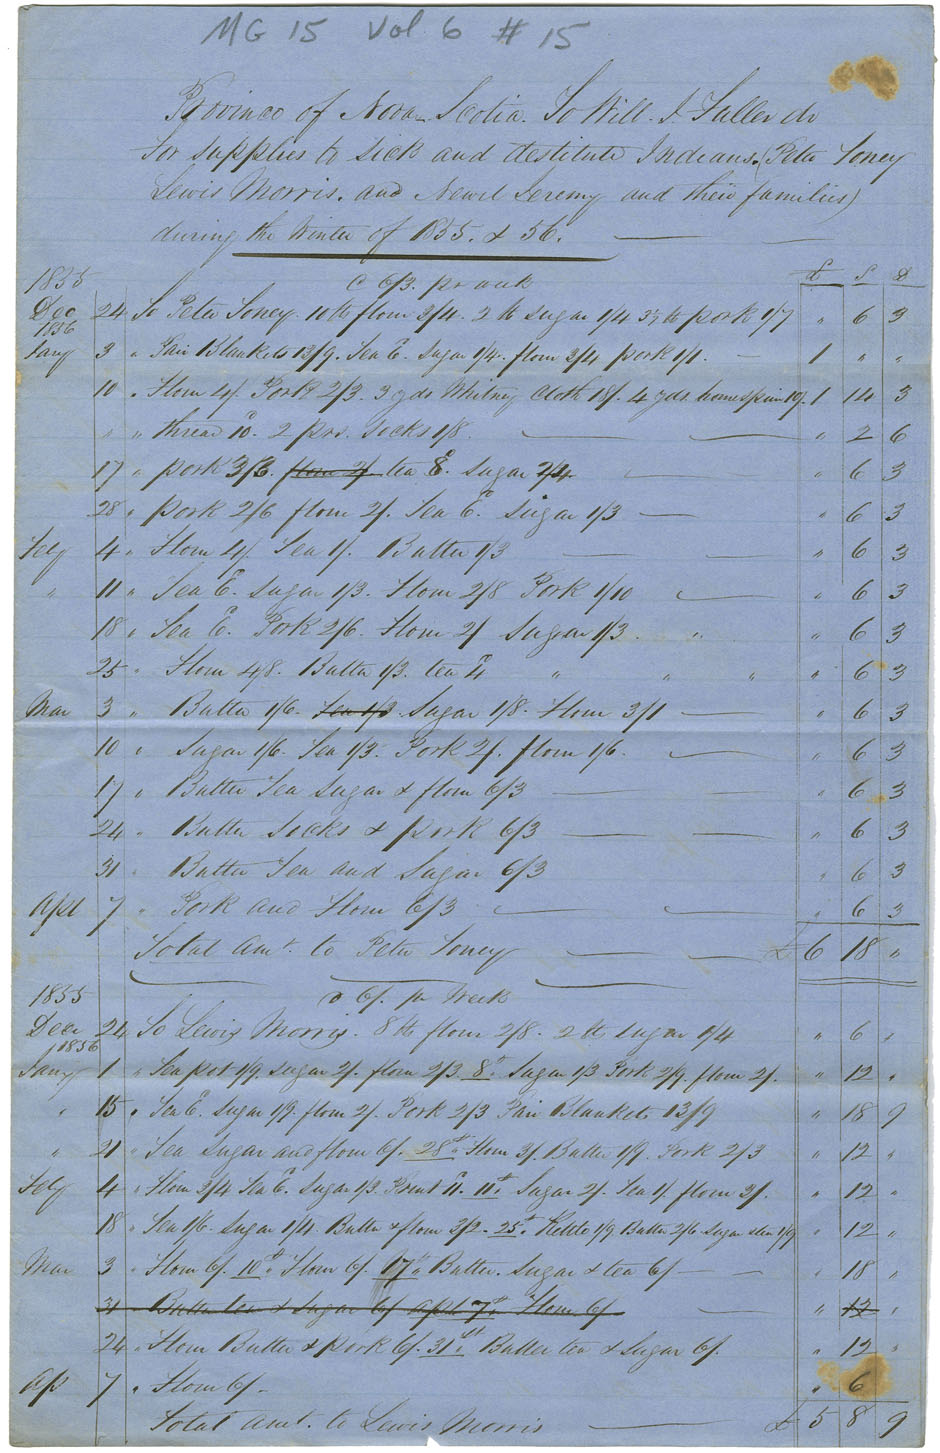 Report of W.J. Fuller of Horton of aid to Mi'kmaq.